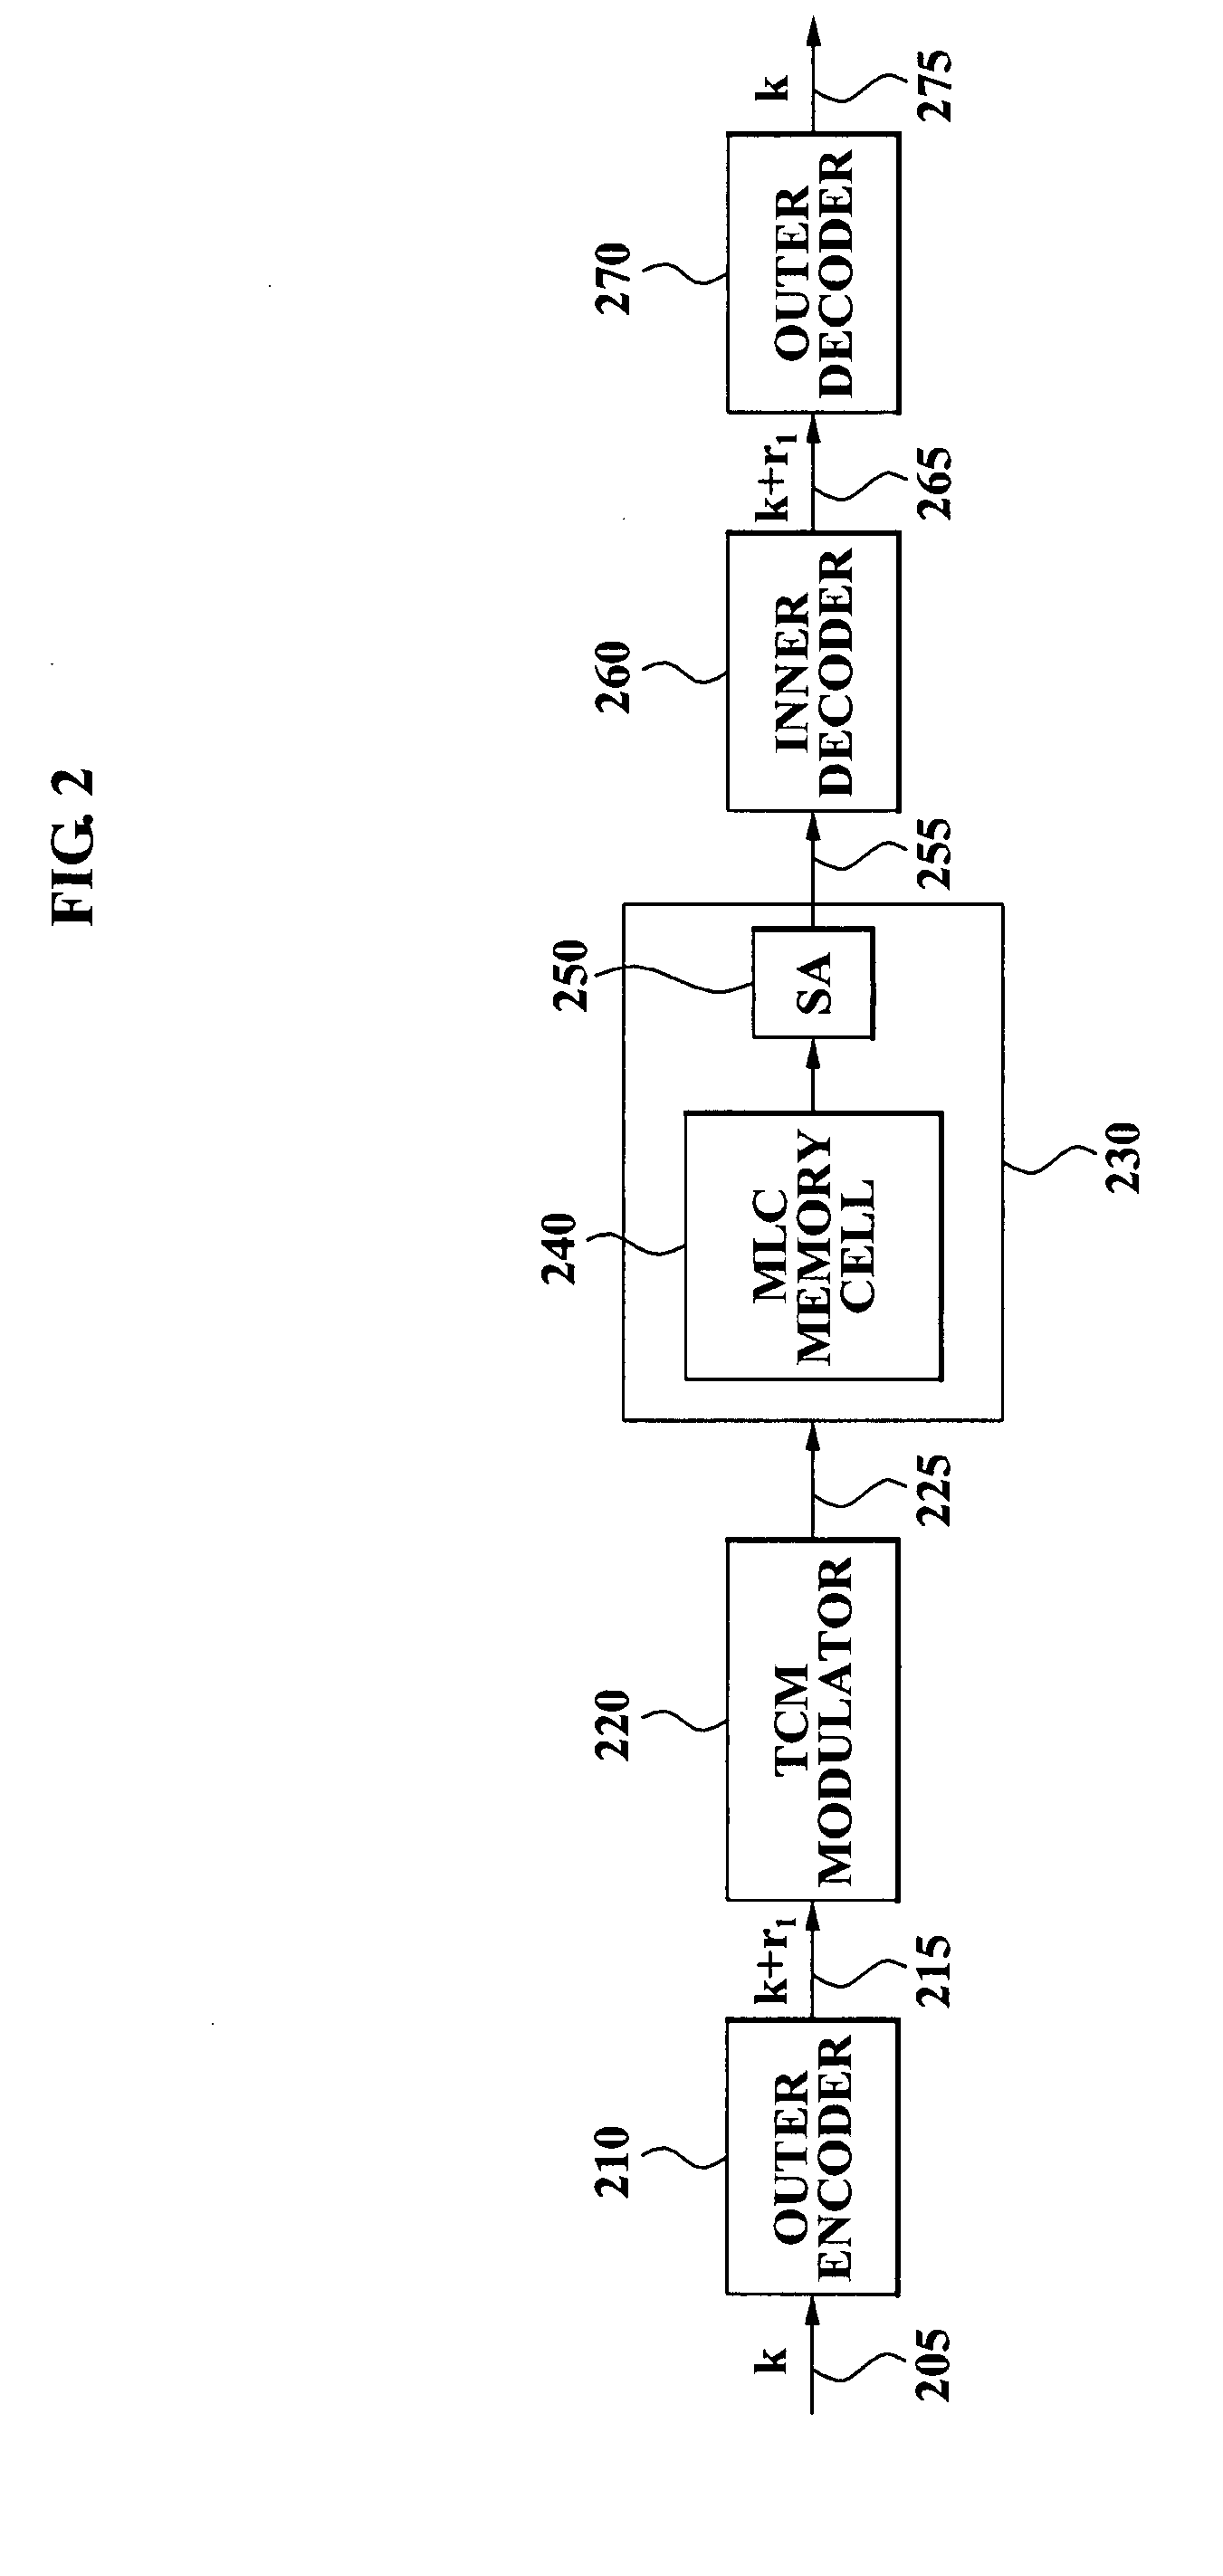 Multi-level cell memory devices using trellis coded modulation and methods of storing data in and reading data from the memory devices